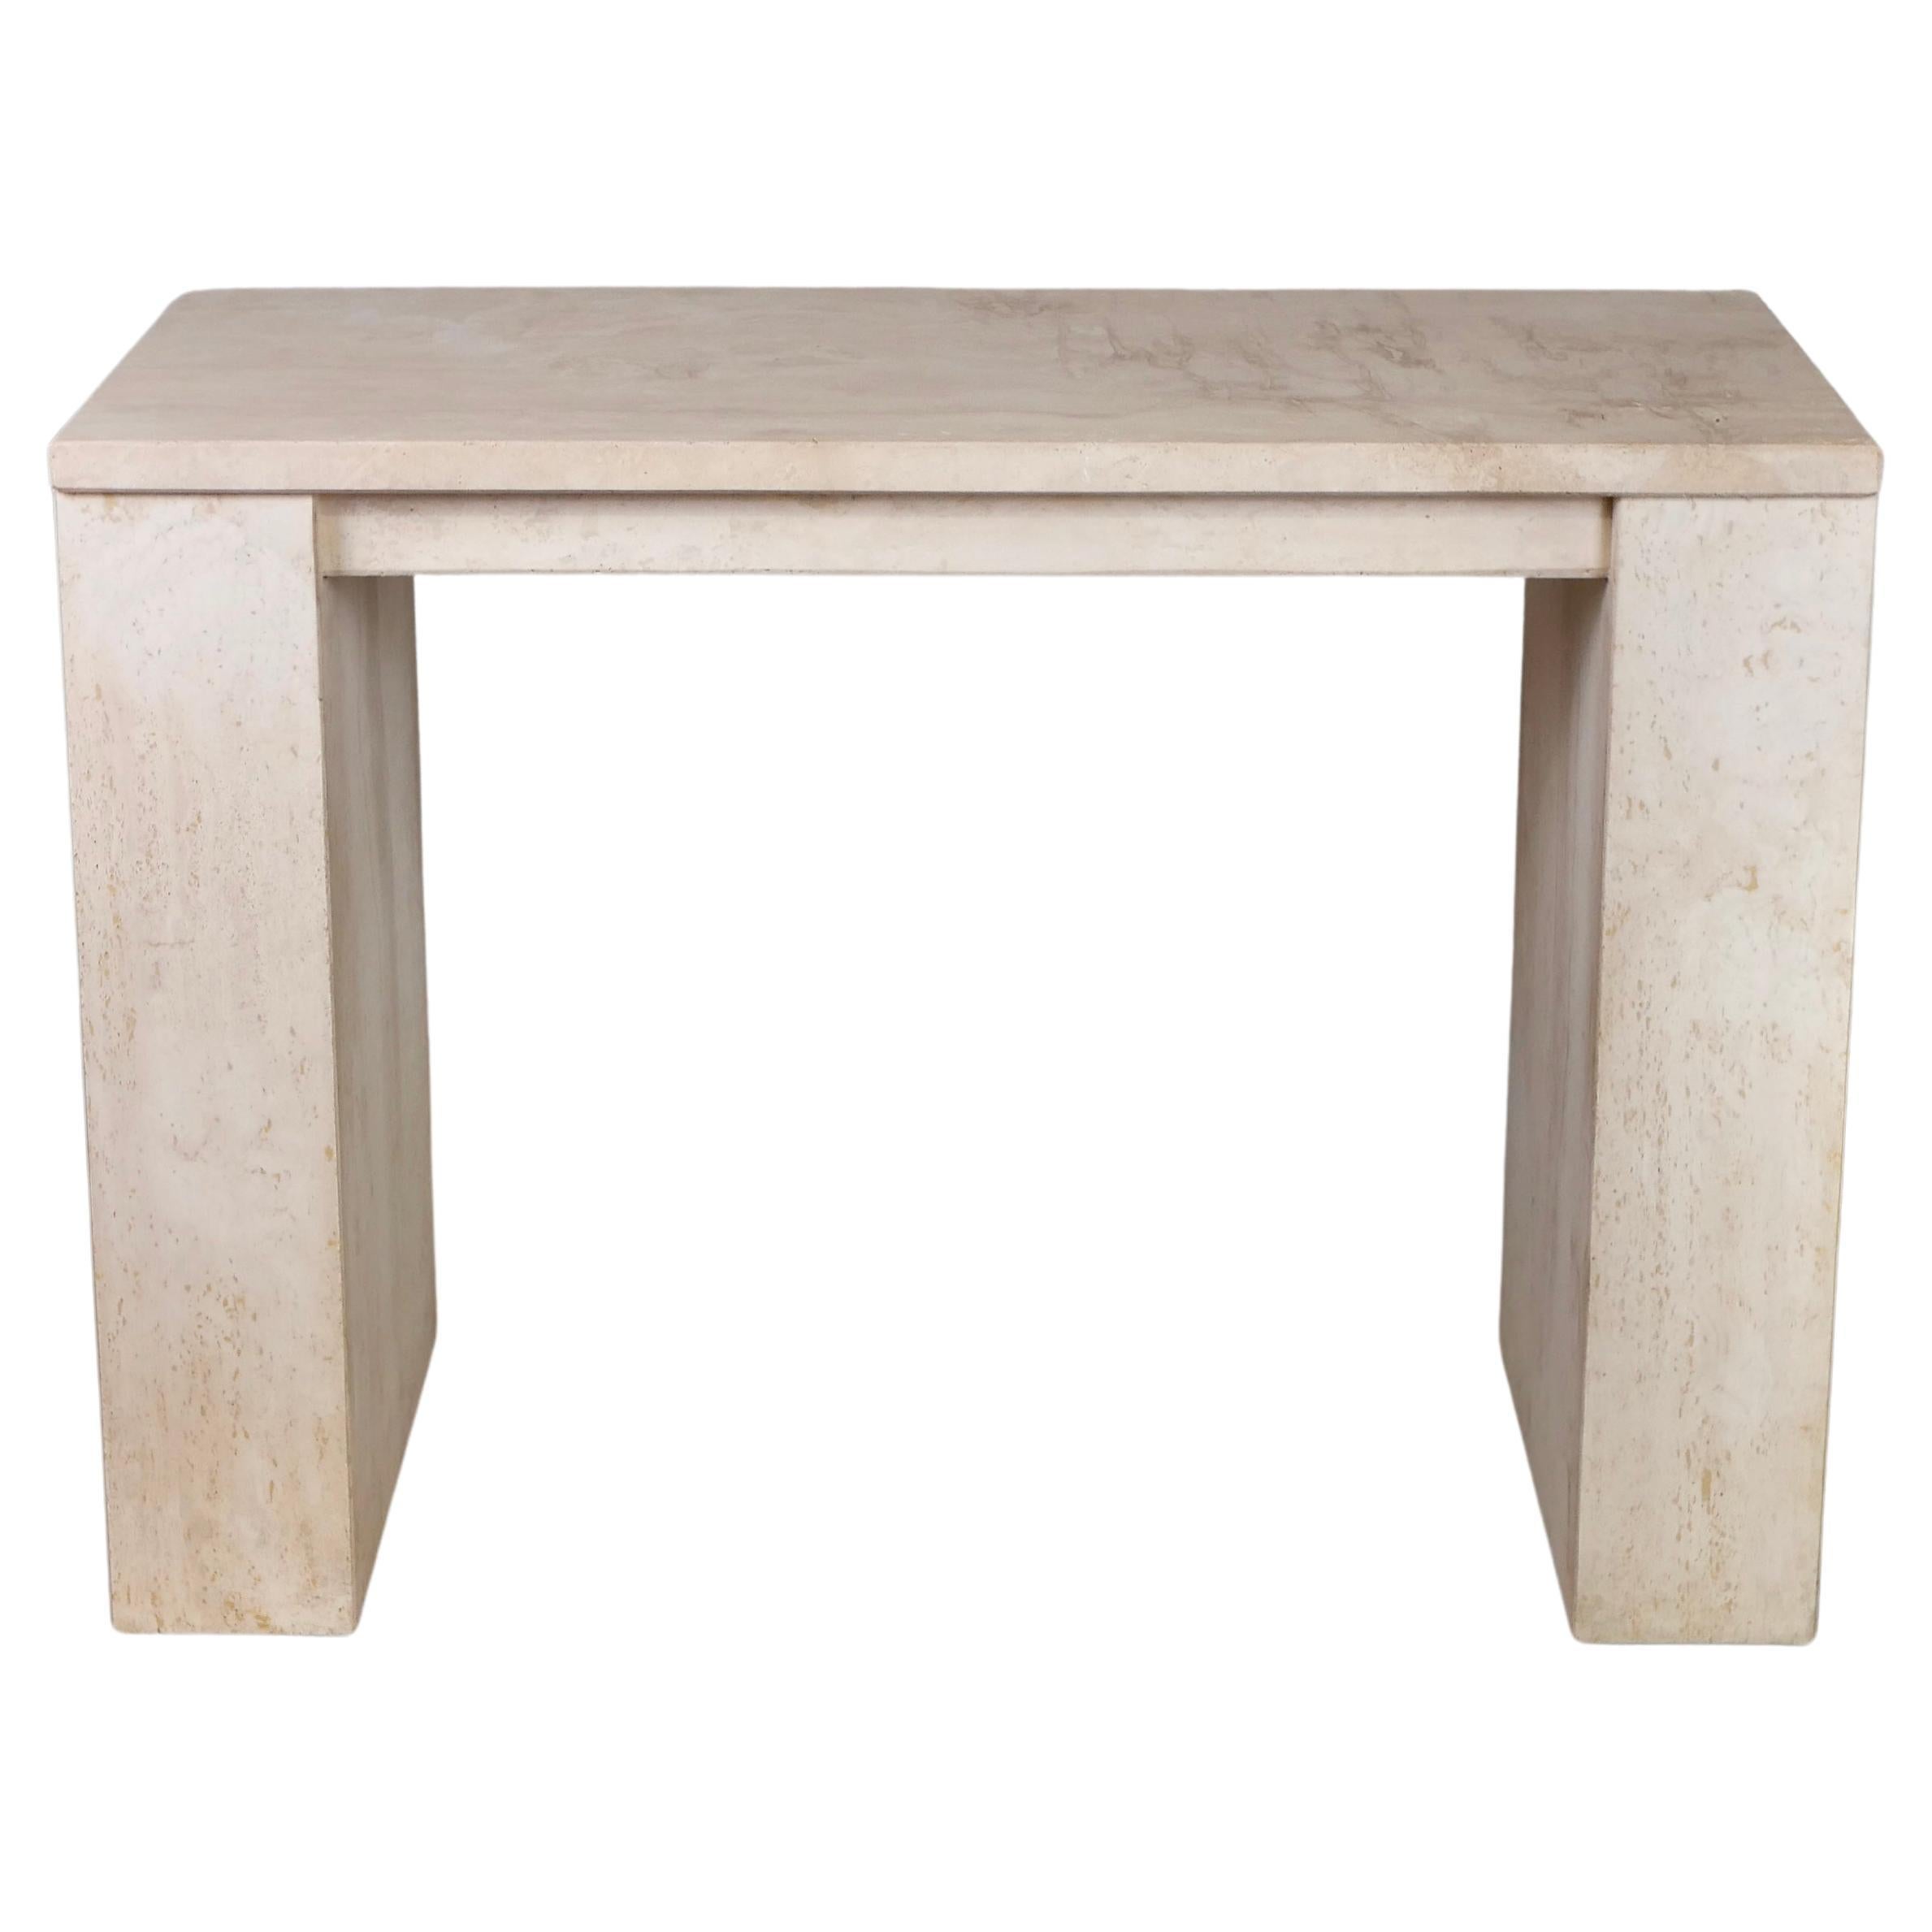 Rare and elegant all-travertine desk from French brand Cinna (Ligne Roset), also perfect as a console or dressing table.
Really sturdy and refined, would fit every interiors, especially minimalistic ones.
In excellent condition, one minor loss on